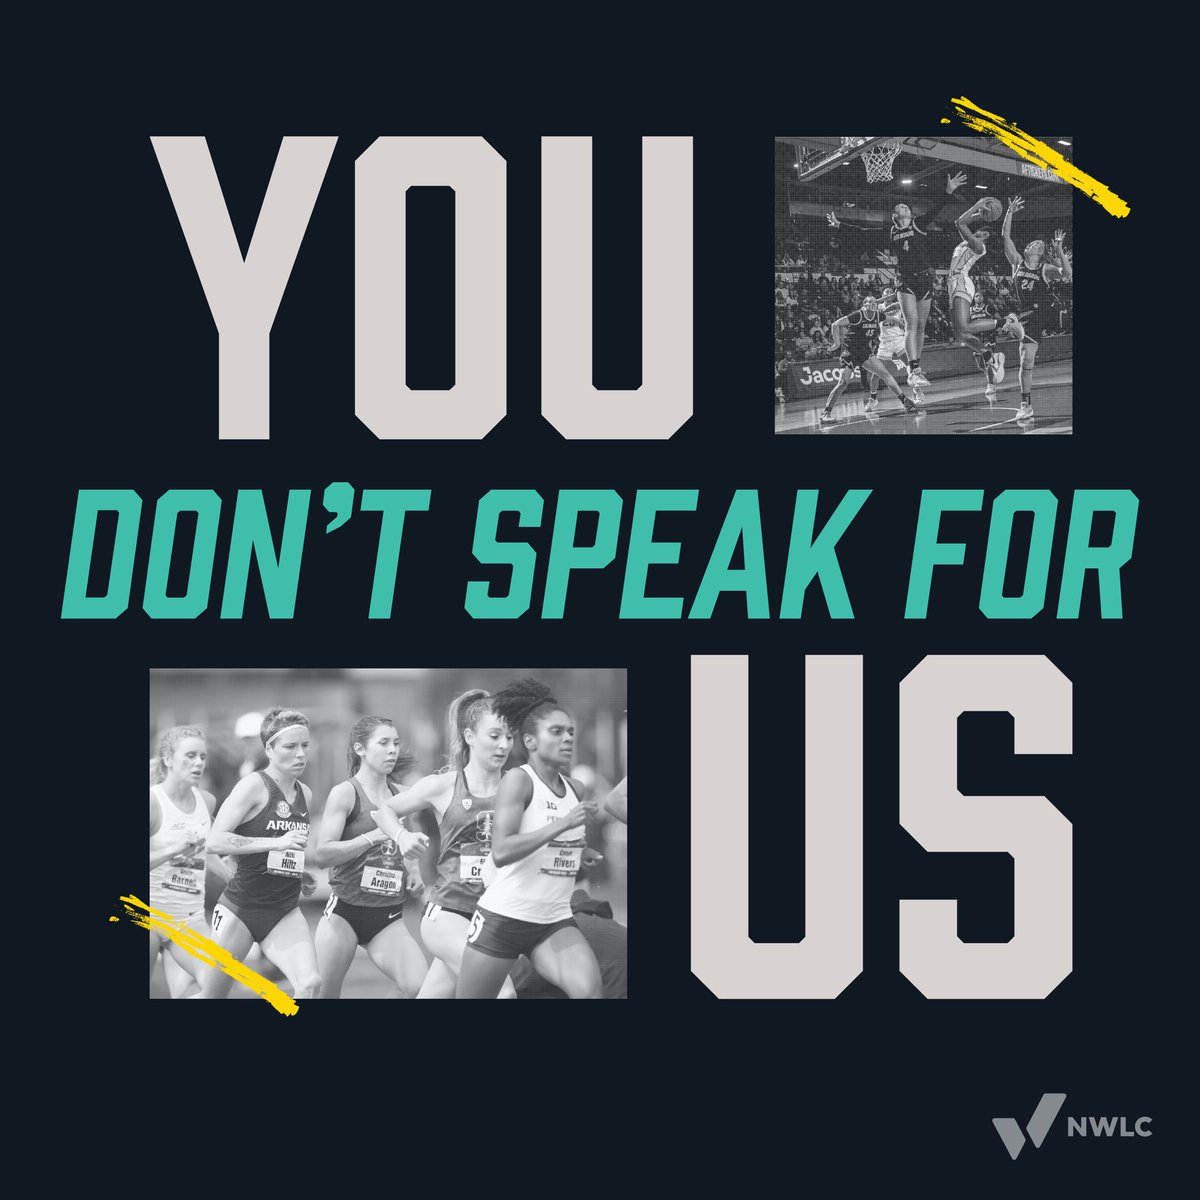 Title IX is not a weapon for bullying trans and gender-nonconforming athletes off the playing field. I’m excited @nationalwomenslawcenter is intervening in the Gaines v. NCAA lawsuit to fight against anti-trans bans and policies targeting trans women. #YouDontSpeakForUs @nwlc